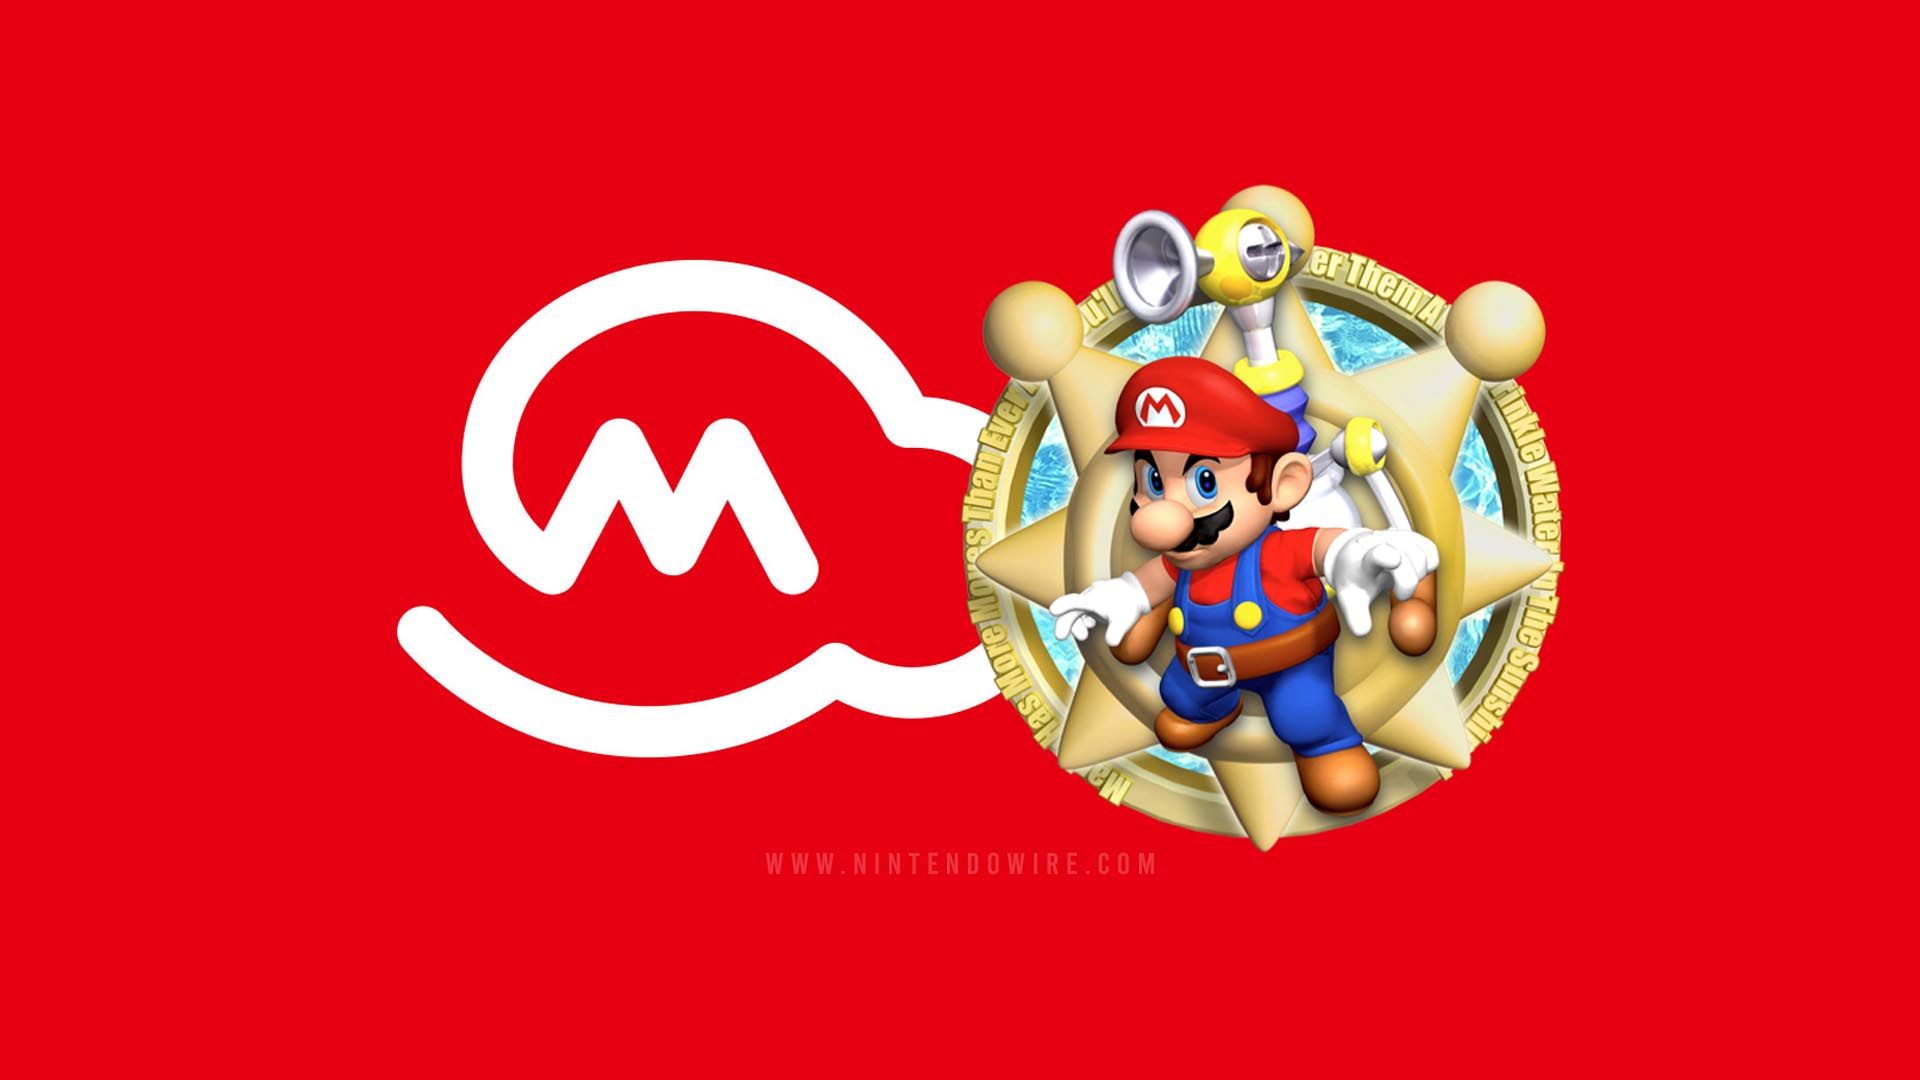 My Nintendo Super Mario 3D All Stars Wallpaper Available Now